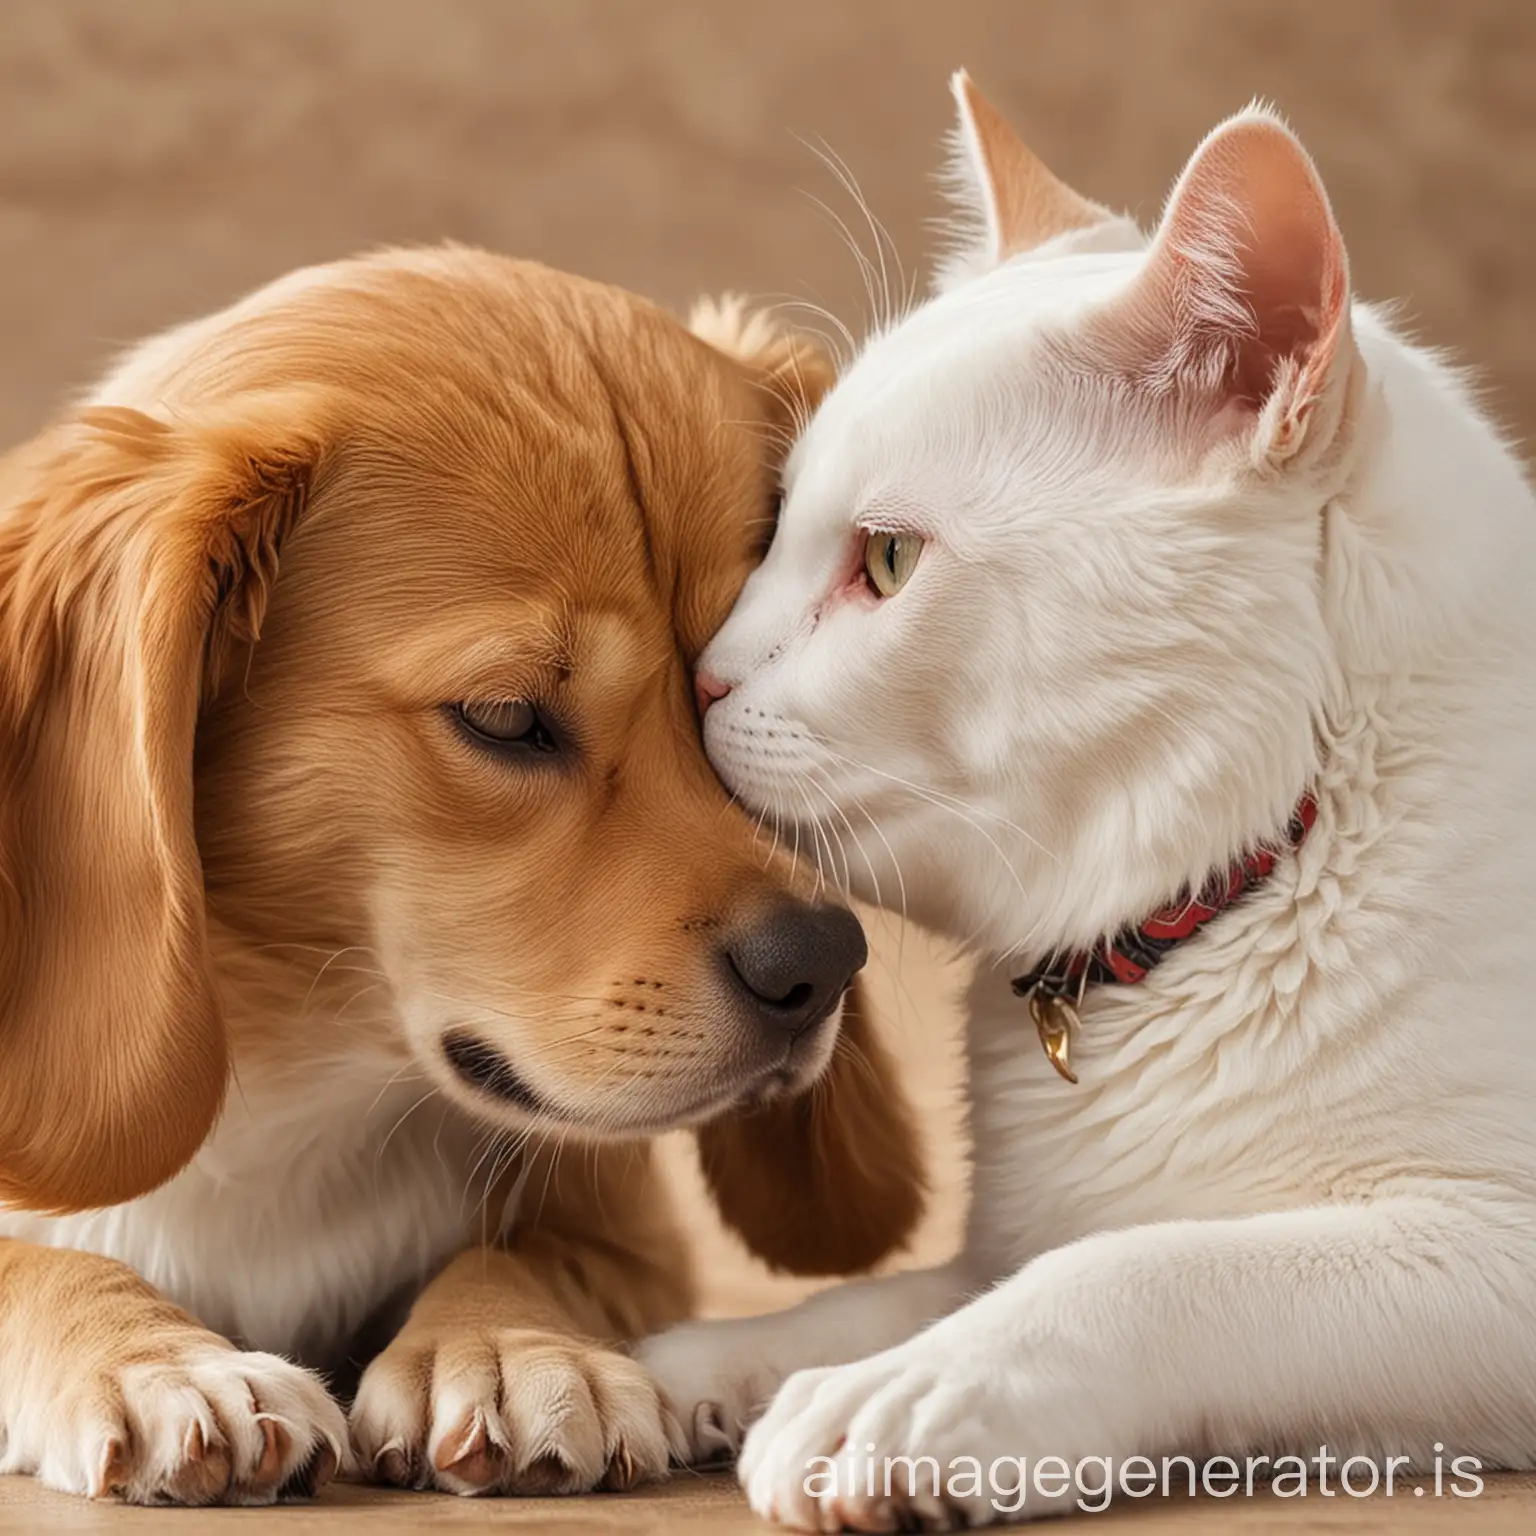 a cat and a dog kissing